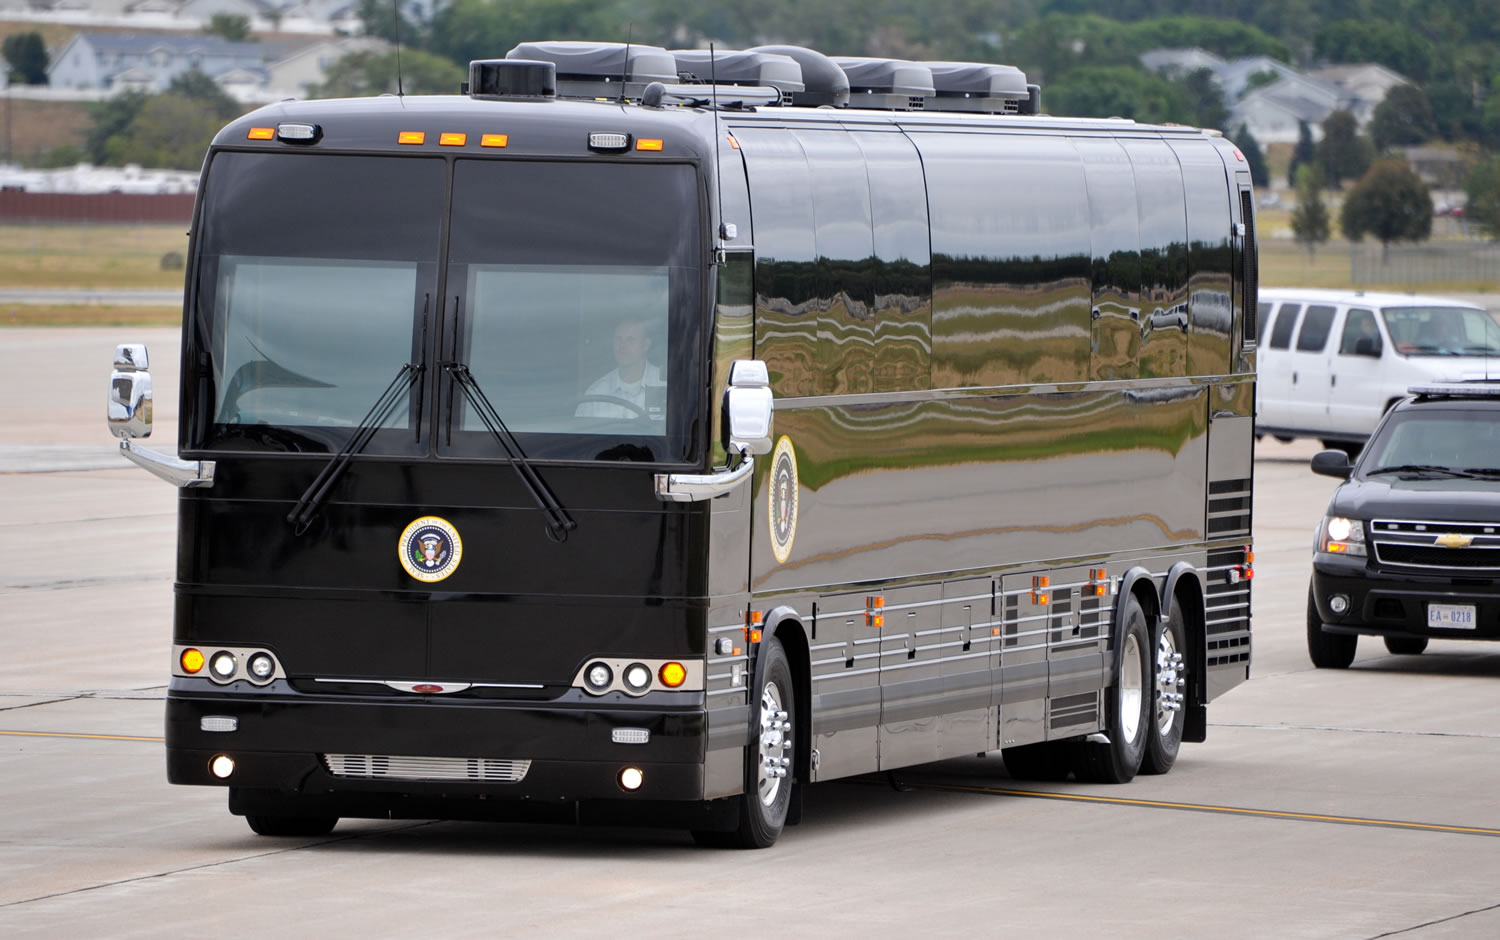 President Barack Obama's armored bus that will tour Iowa pulls up next to Air Force One, at Offutt Air Force Base in Bellevue, Neb.